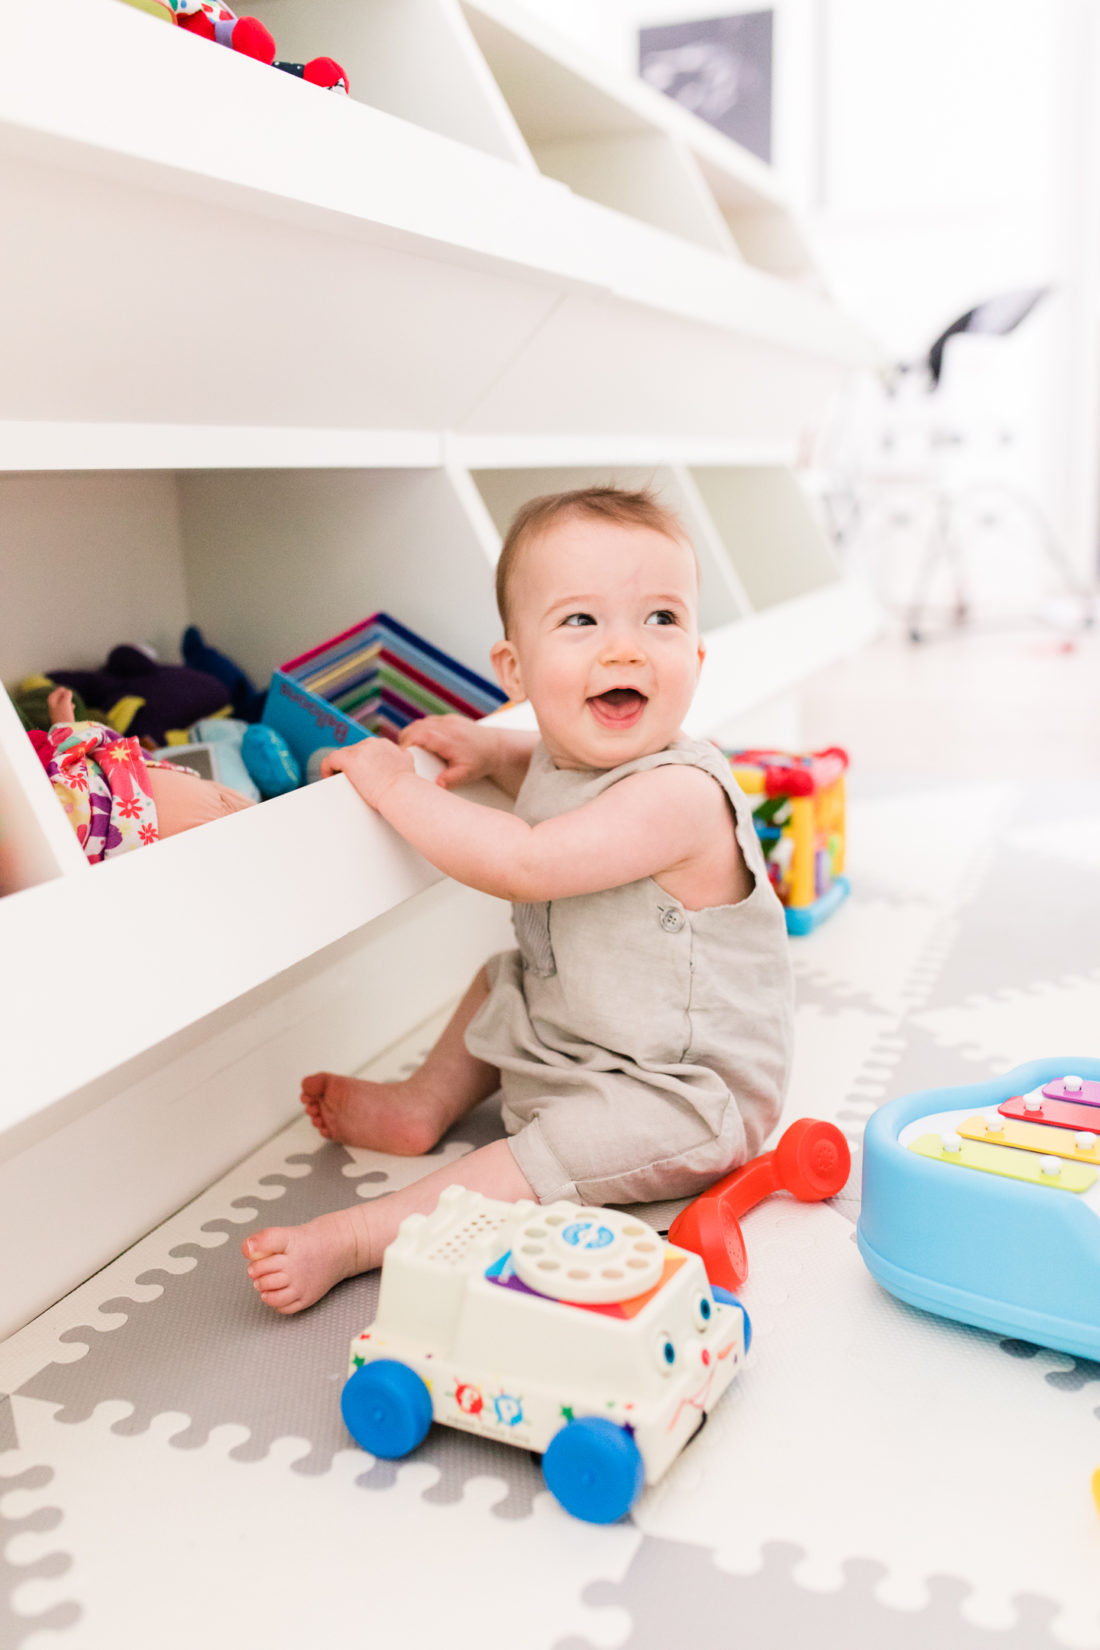 Eight month old Major Martino sits among his colorful toys at home in Connecticut